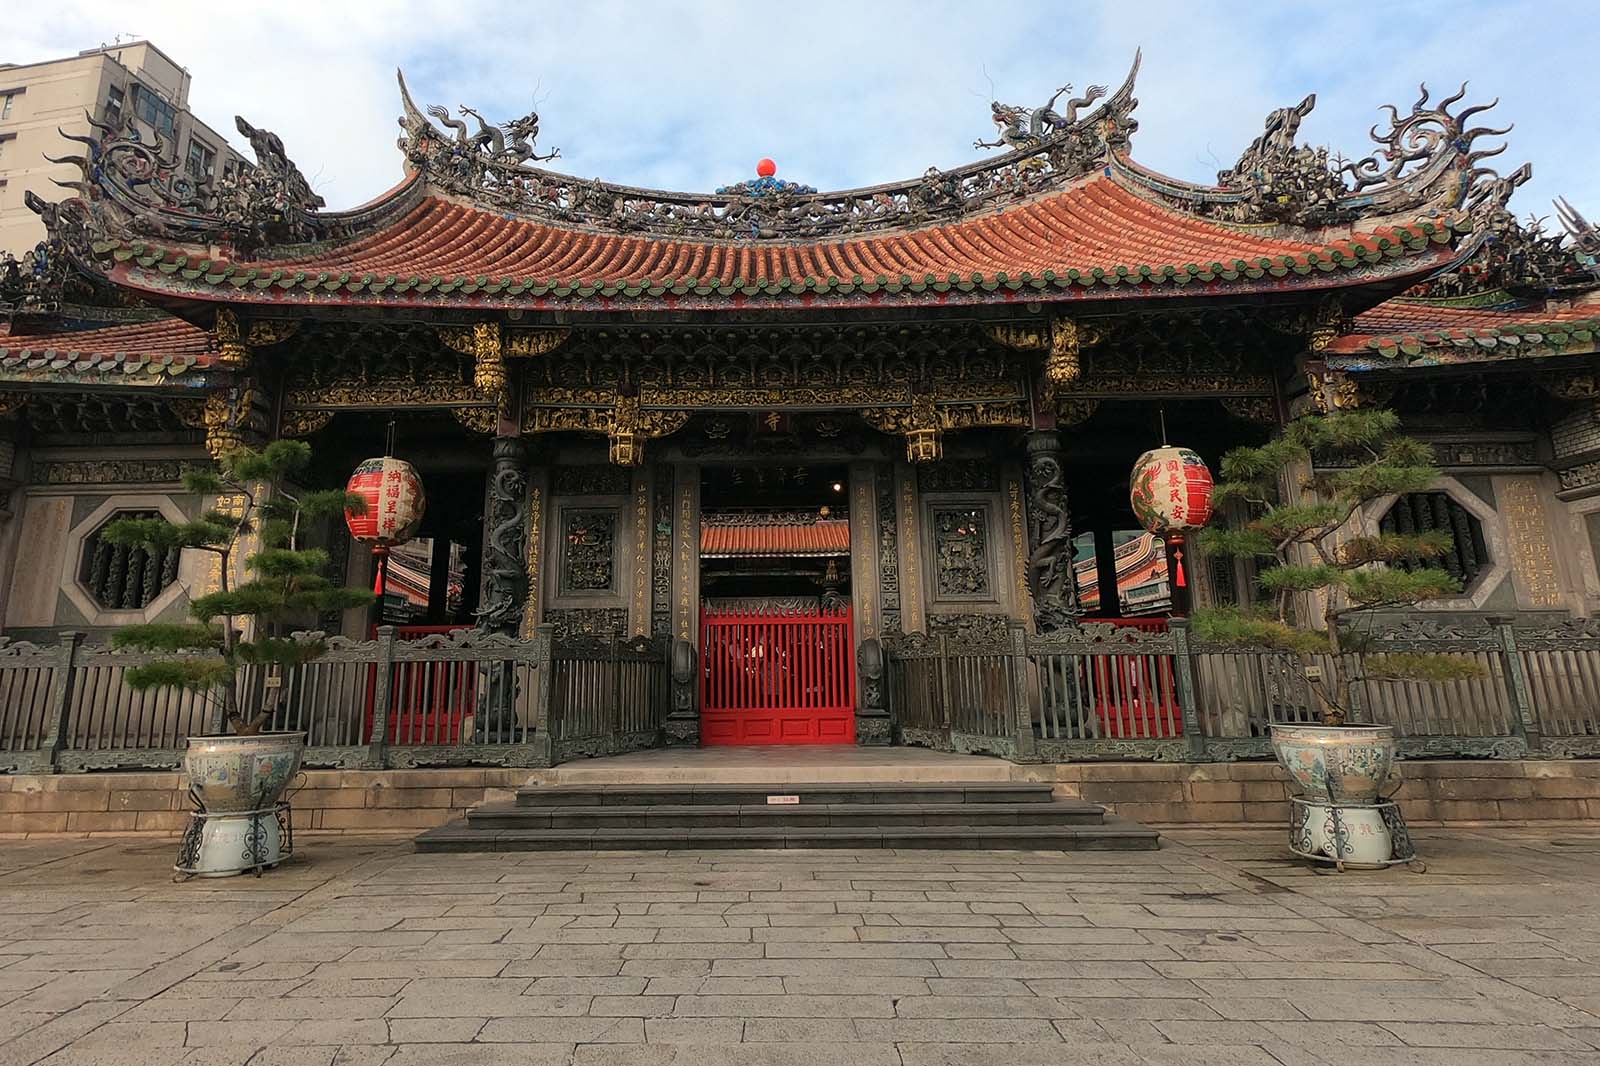 The aged front facade of Longshan Temple in Wanhua is reminder of Taipei's heritage.